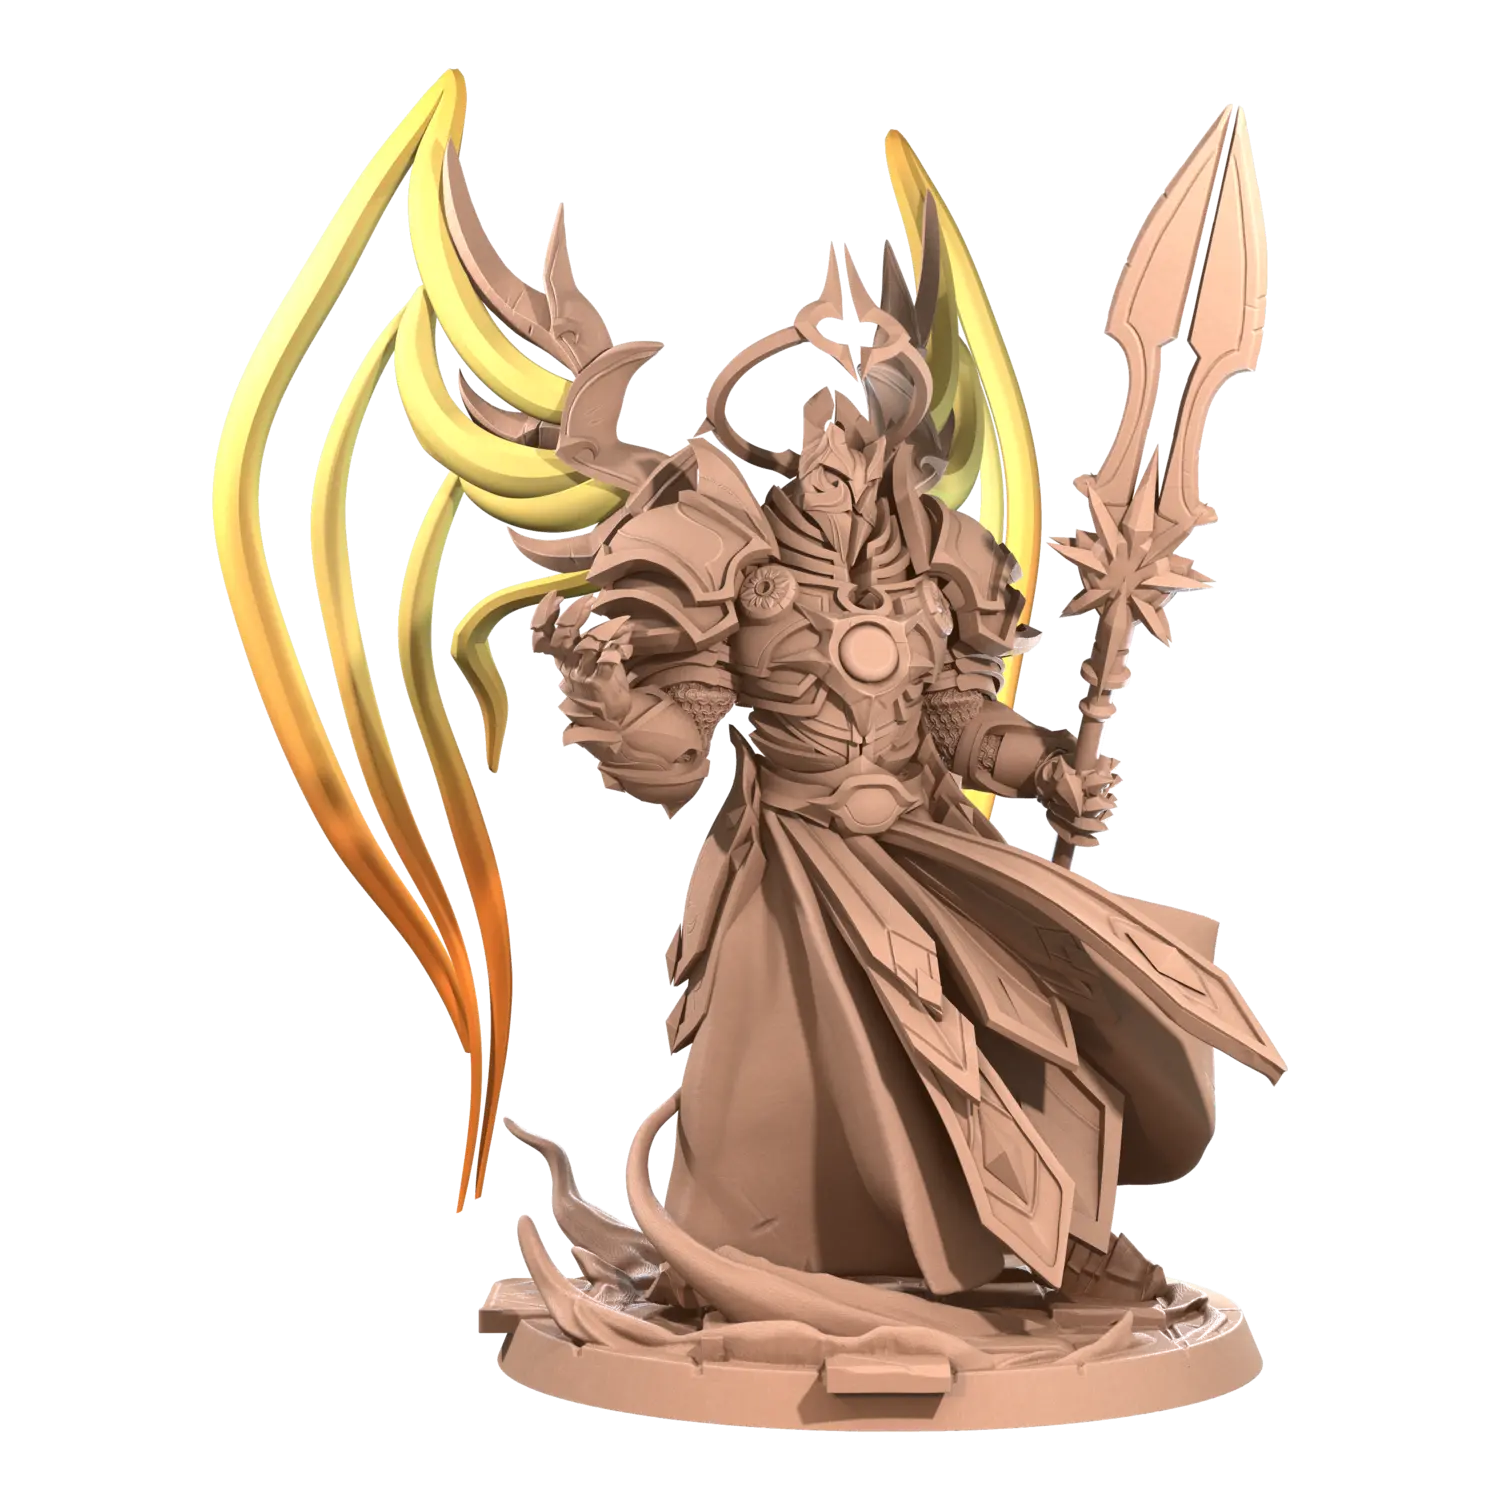 DnD Angel - Fighter - Miniature - Paladin - Serapfims Michael, Seraphim of Valor  Angel - Fighter - Miniature - Paladin - Serapfims sold by DoubleHitShop